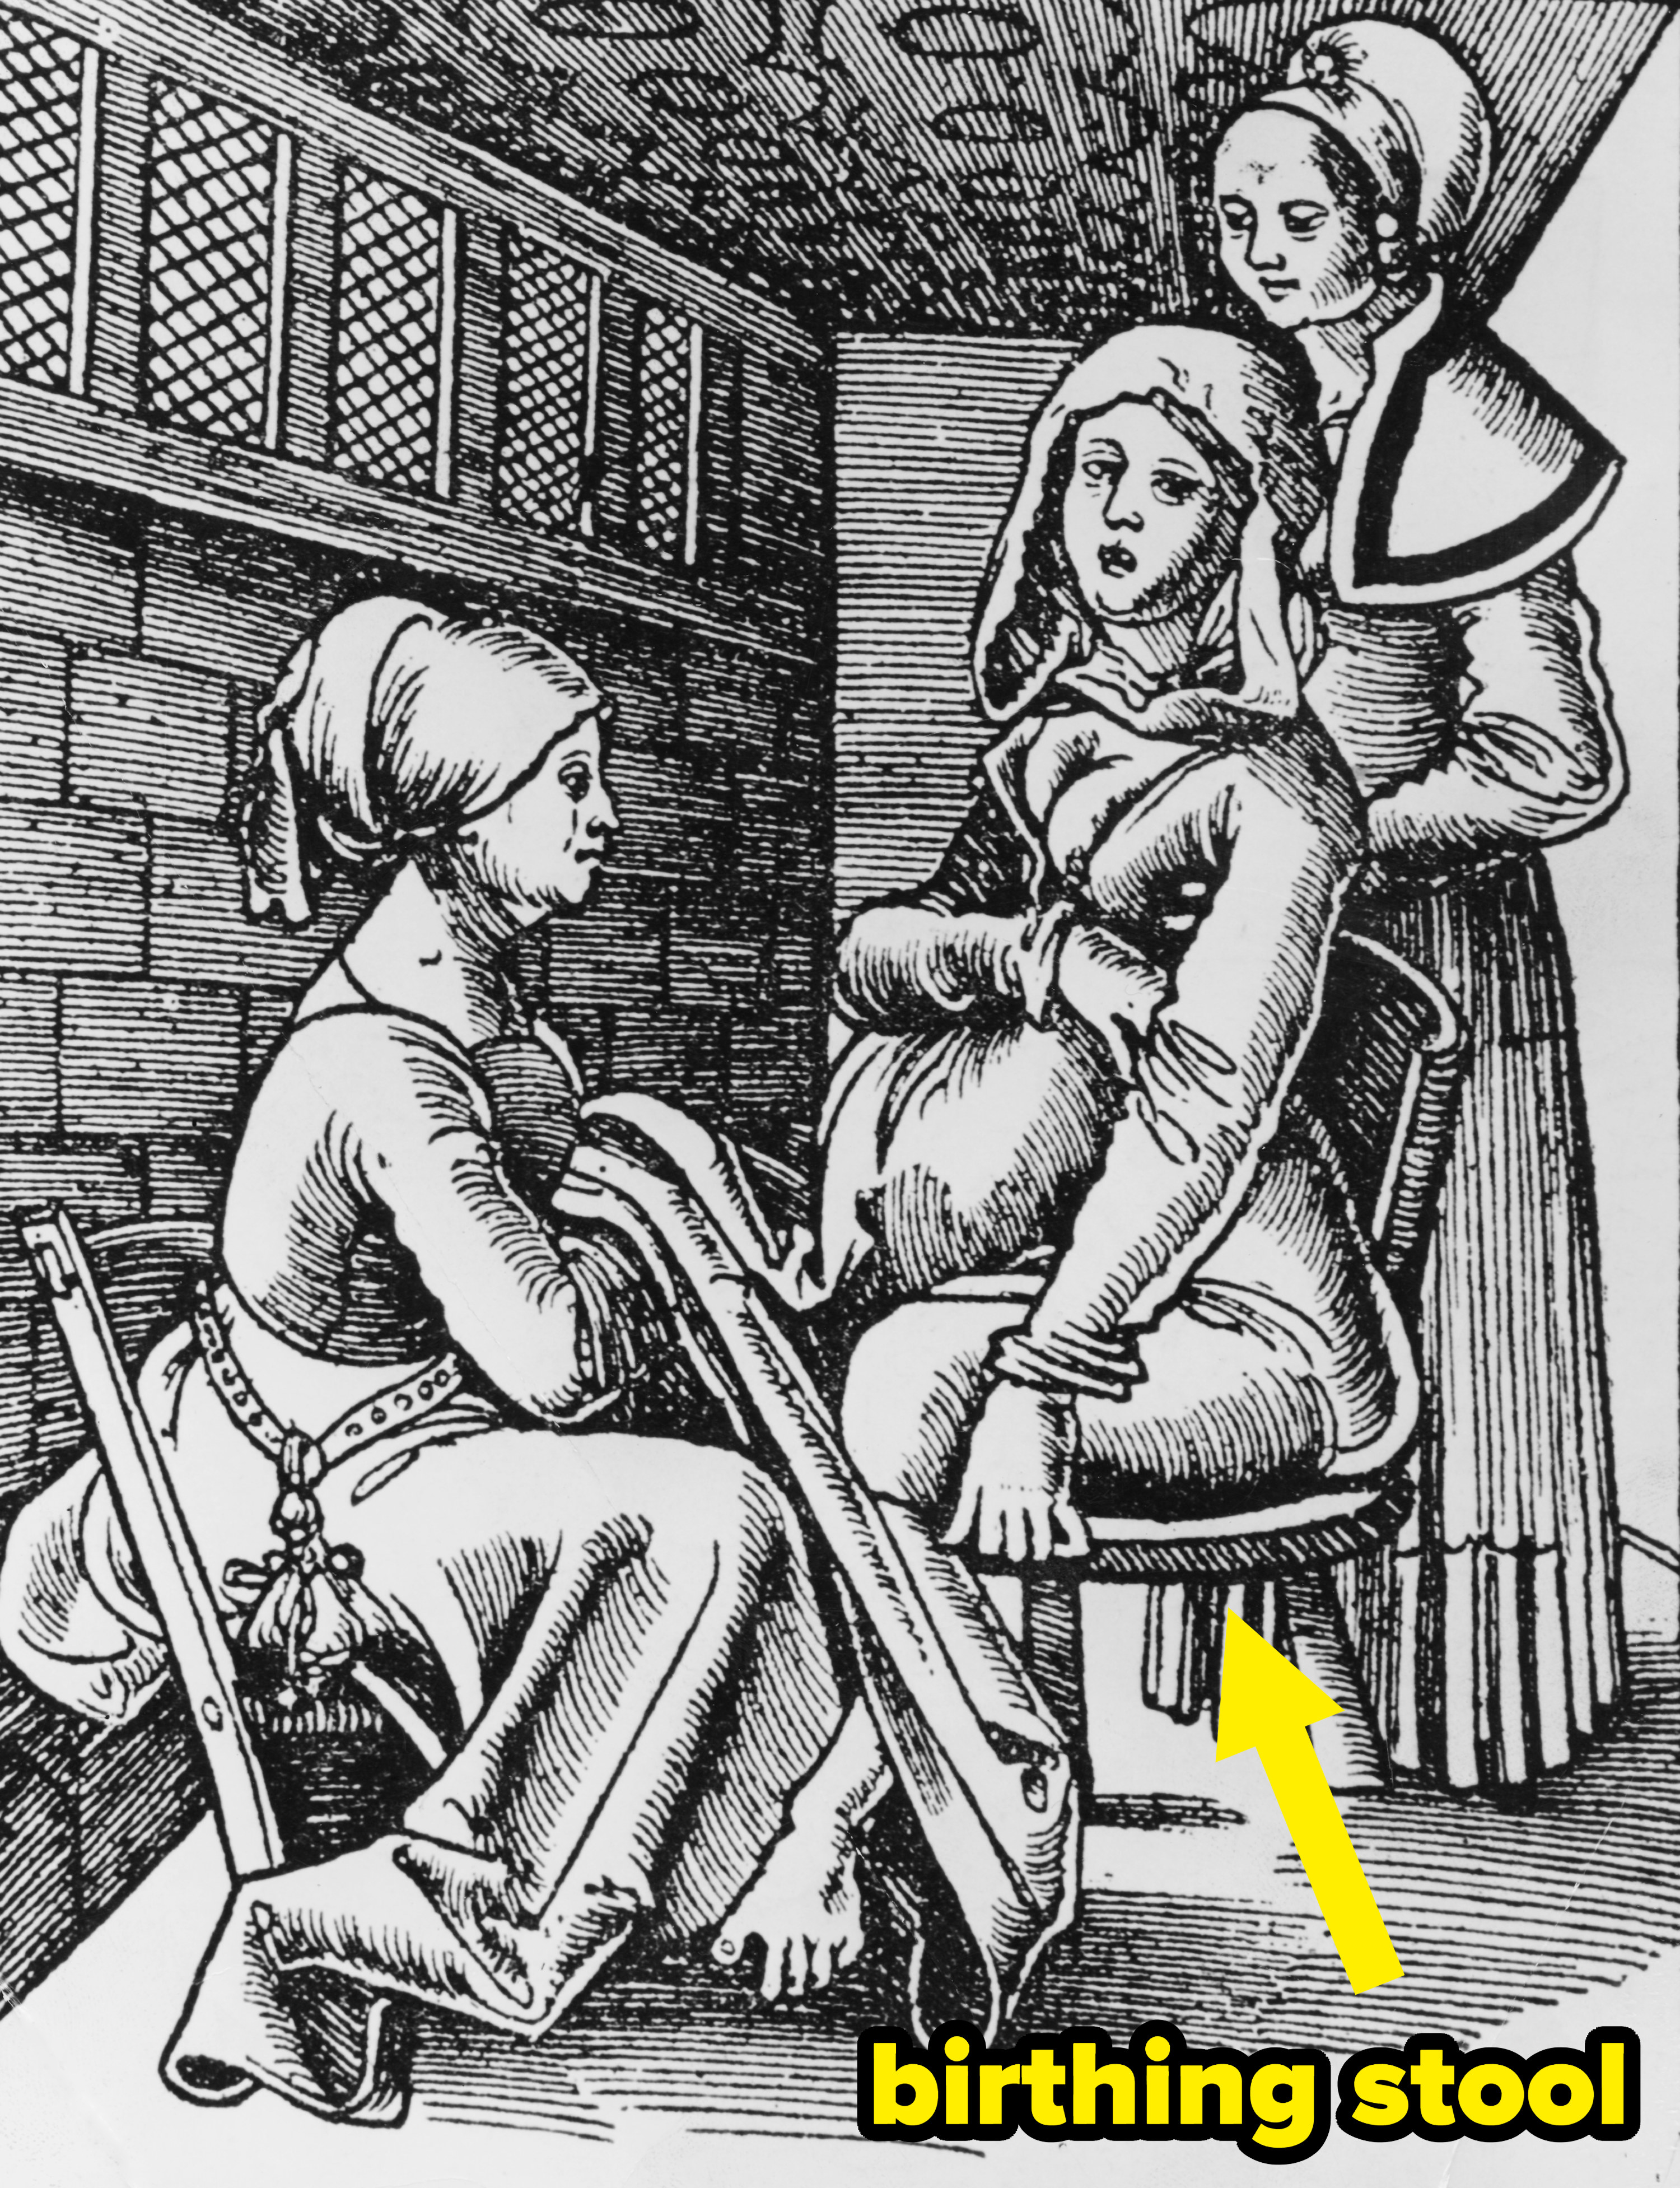 A lithograph of midwives helping a woman give birth on a birthing stool